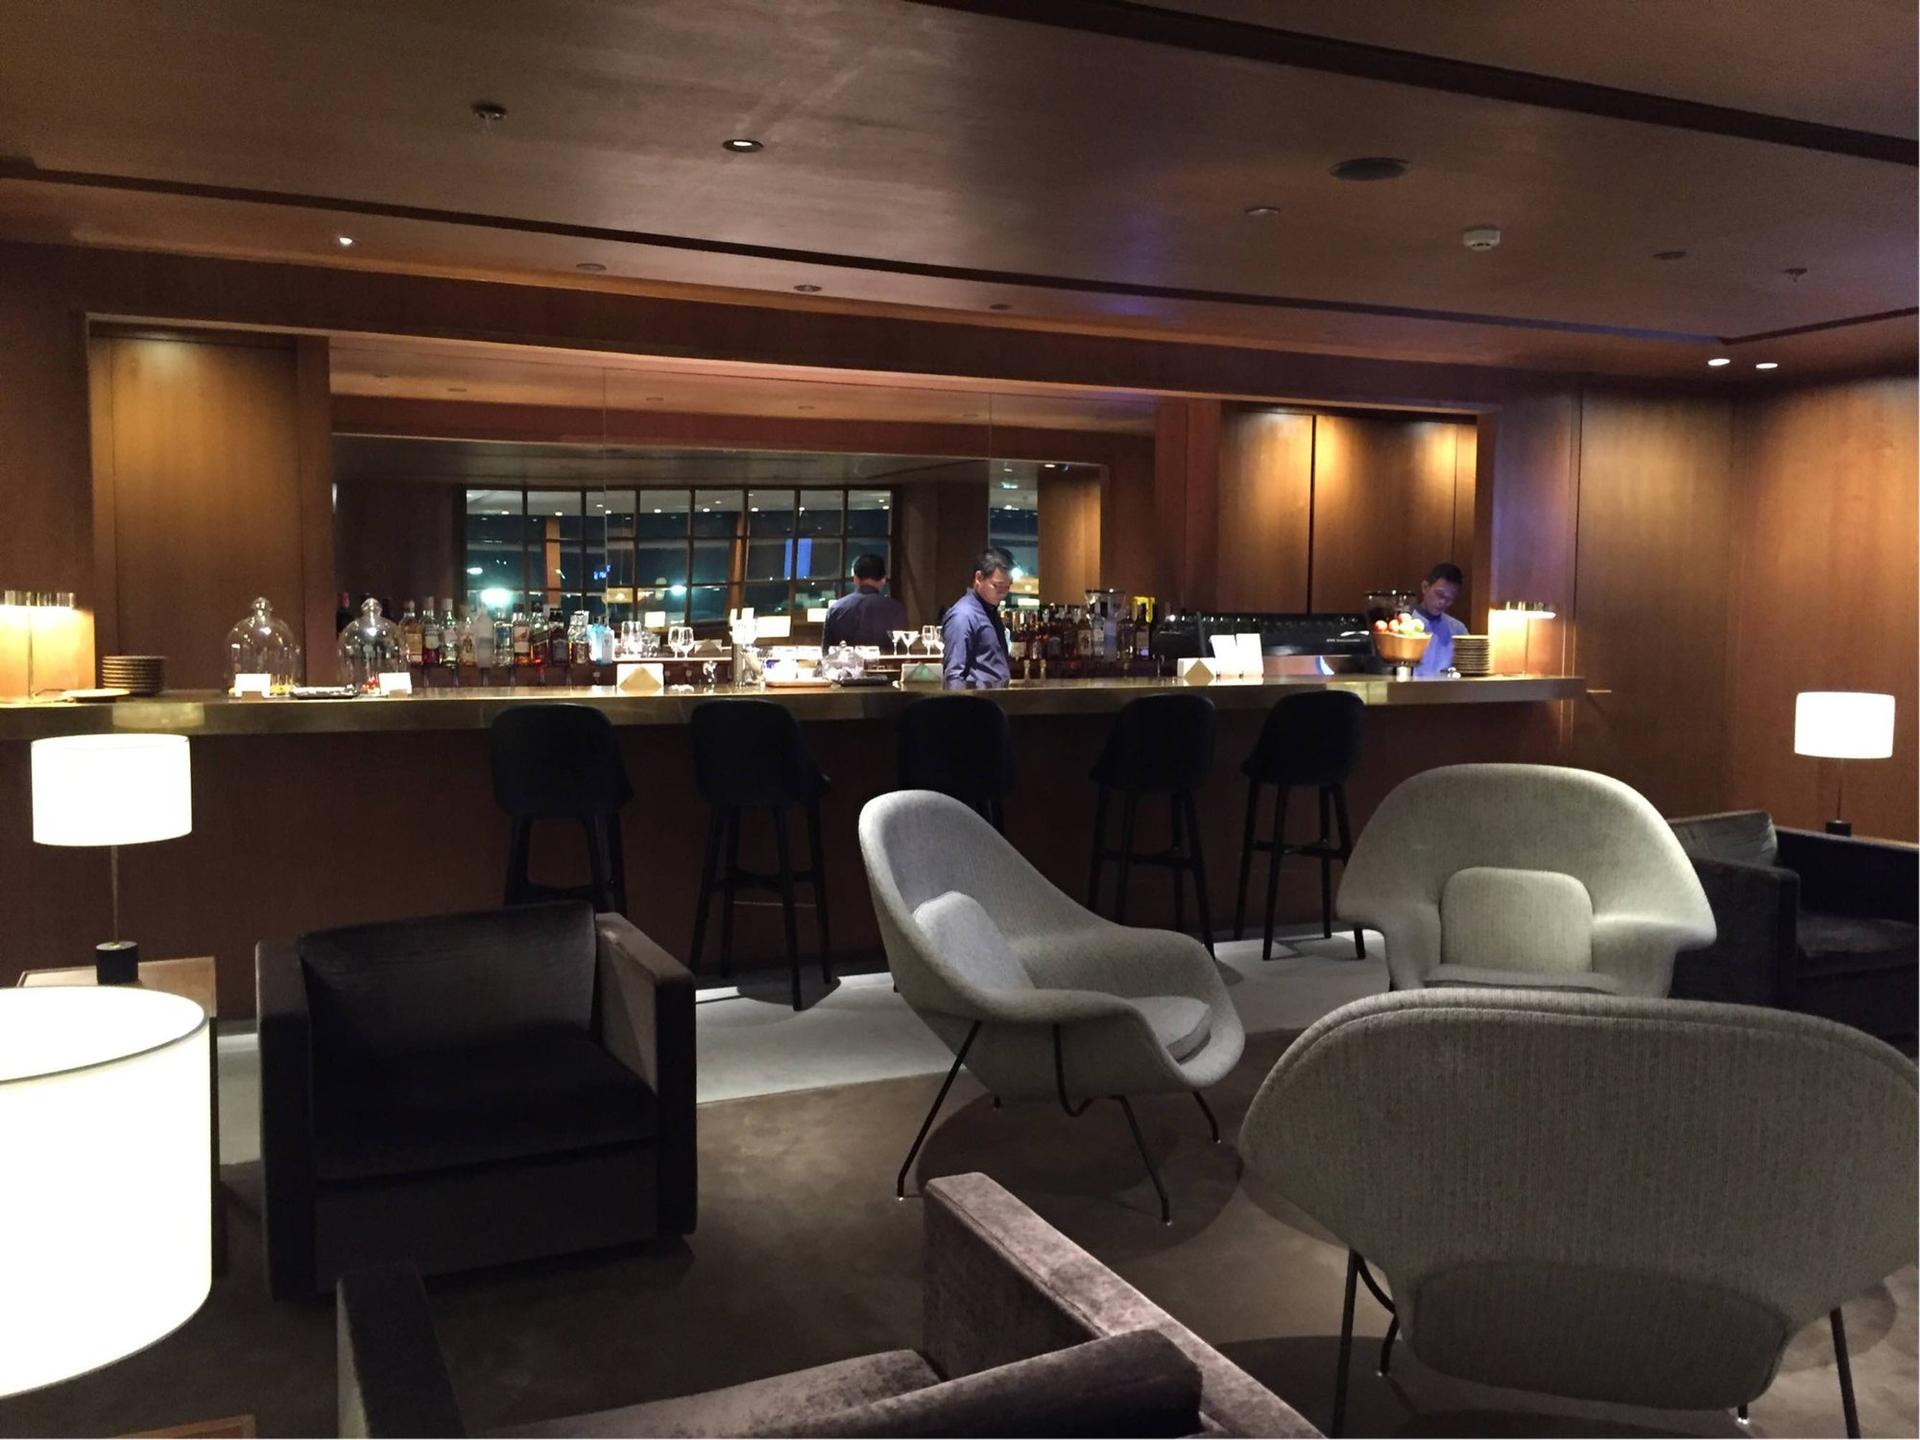 Cathay Pacific First and Business Class Lounge image 10 of 19